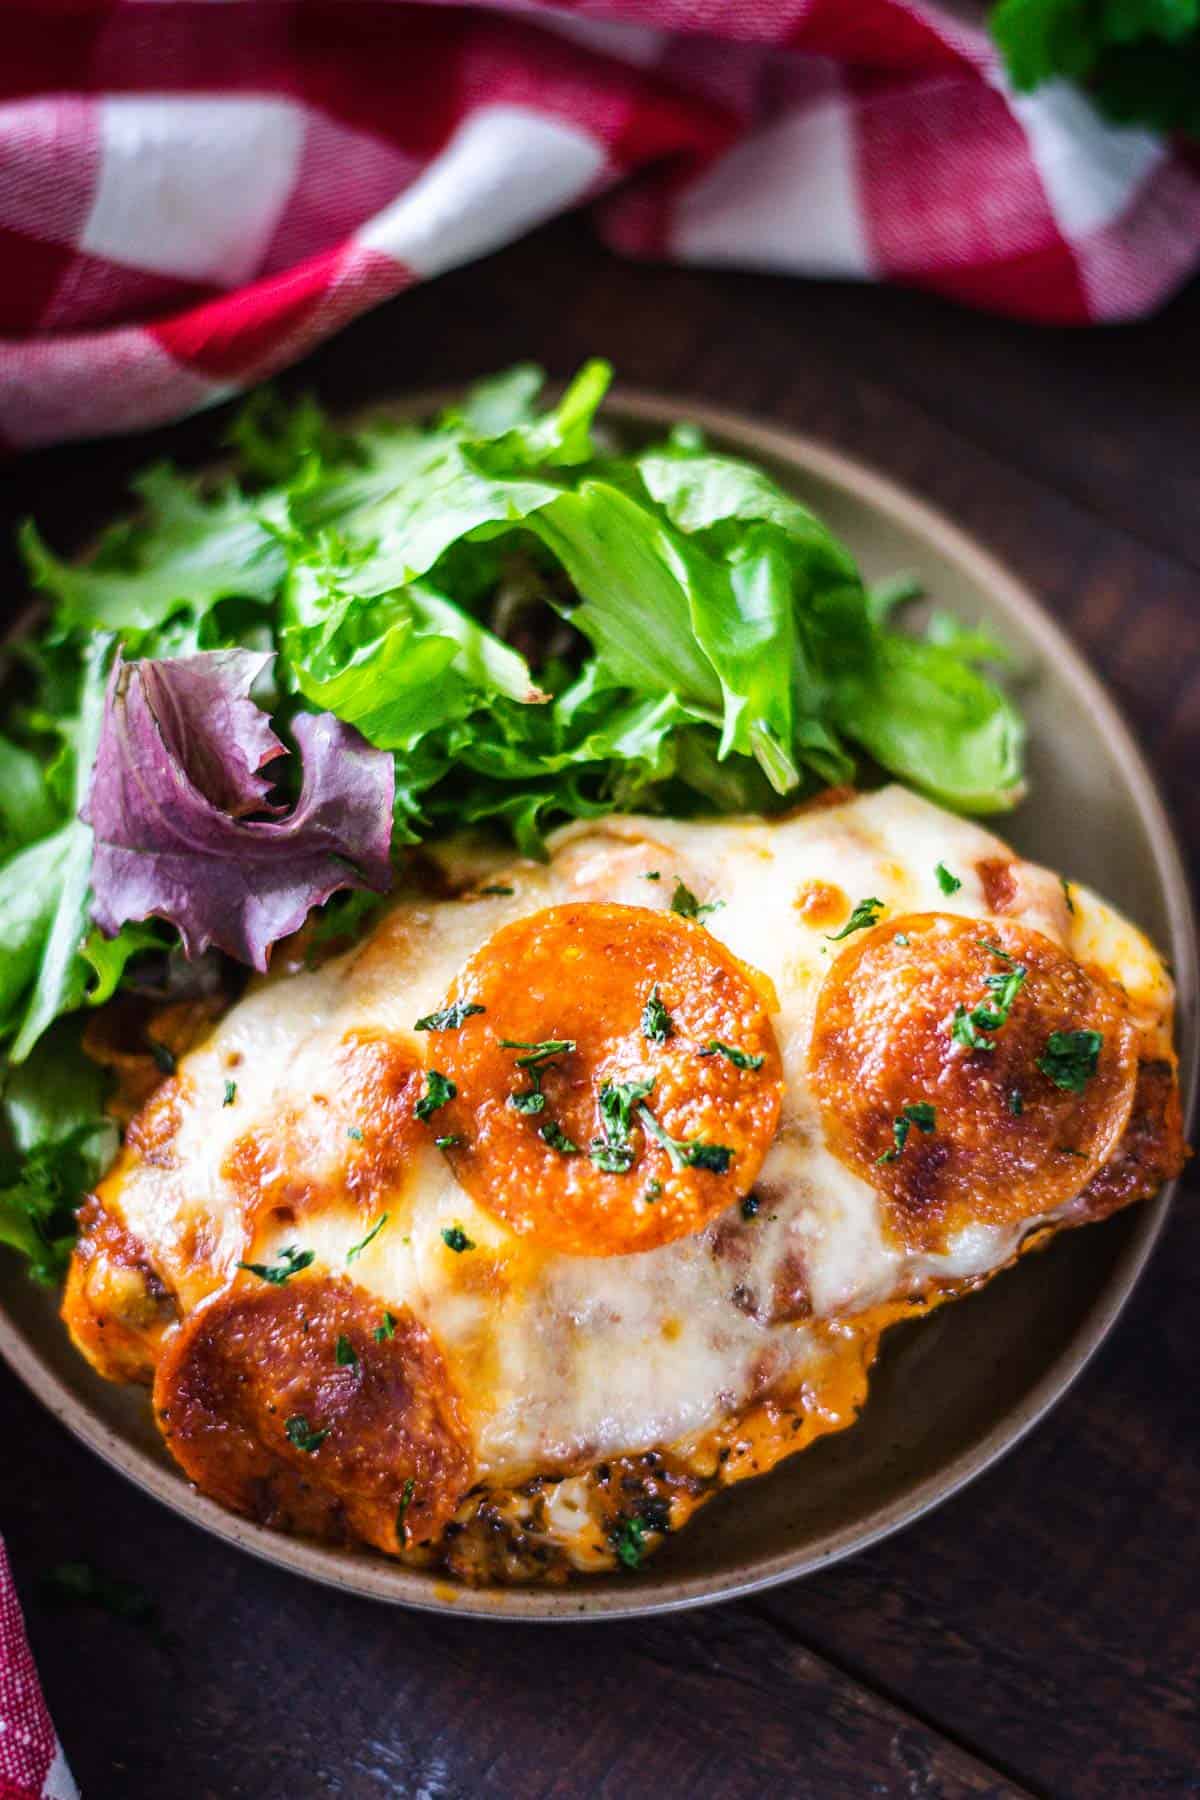 Overhead image of baked pizza chicken plated with a green salad.